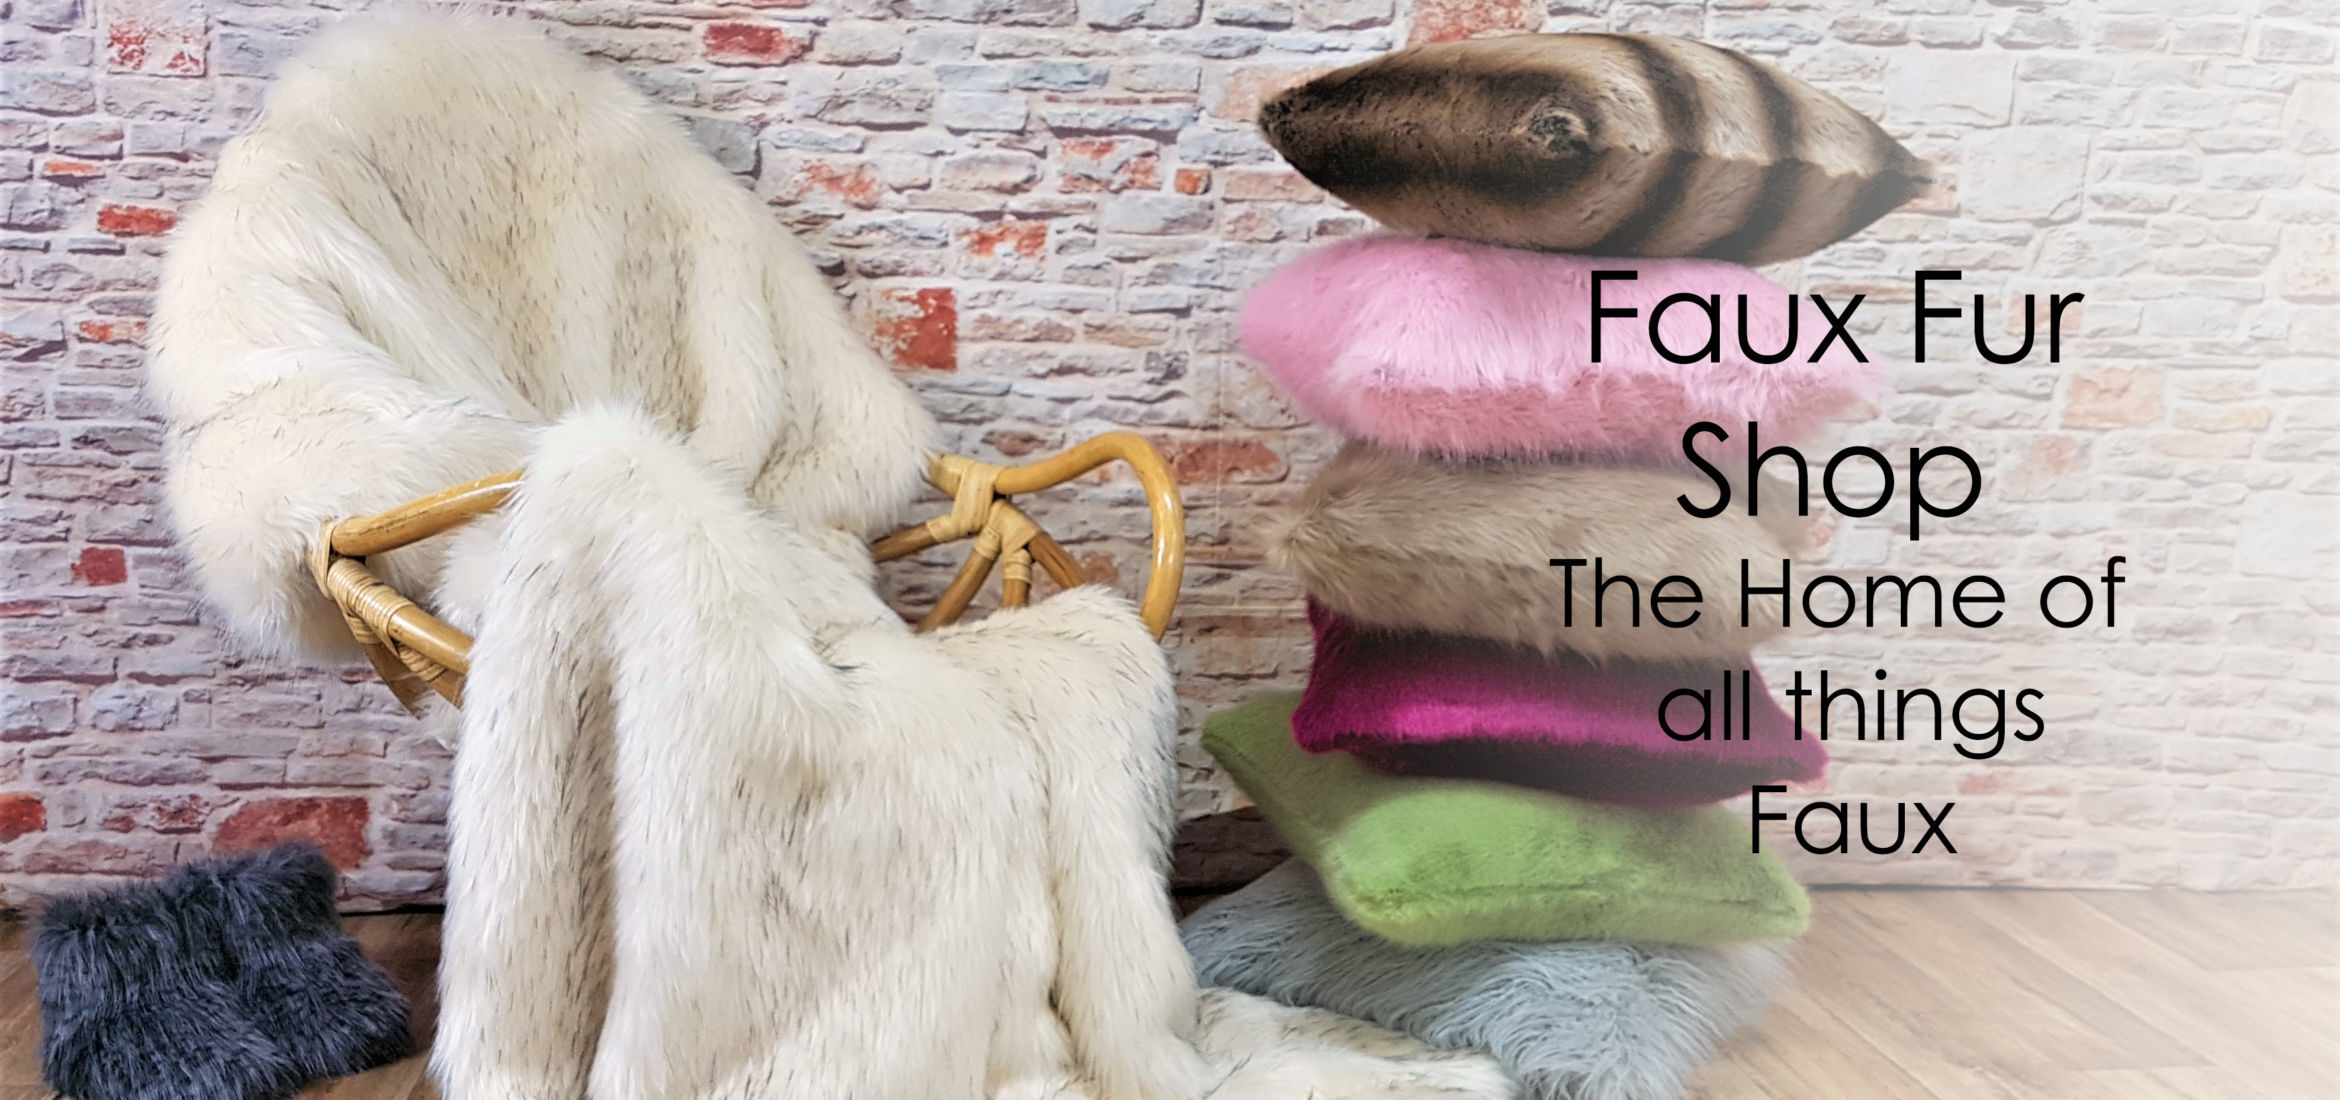 The Home of All Things Faux.